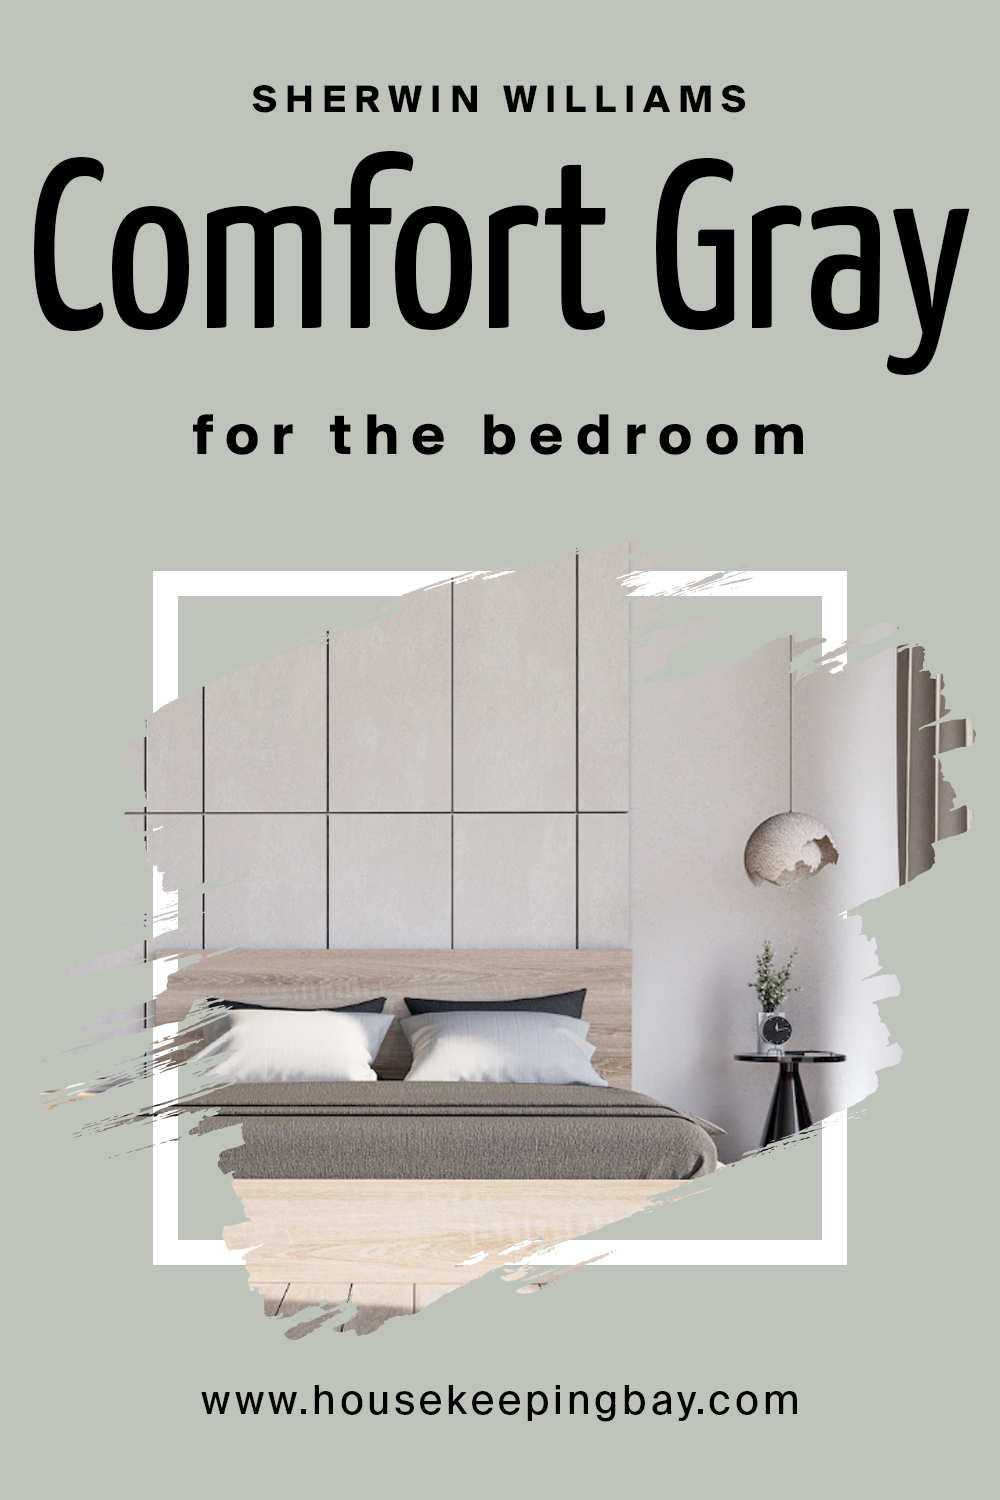 Sherwin Williams. Comfort Gray For the bedroom